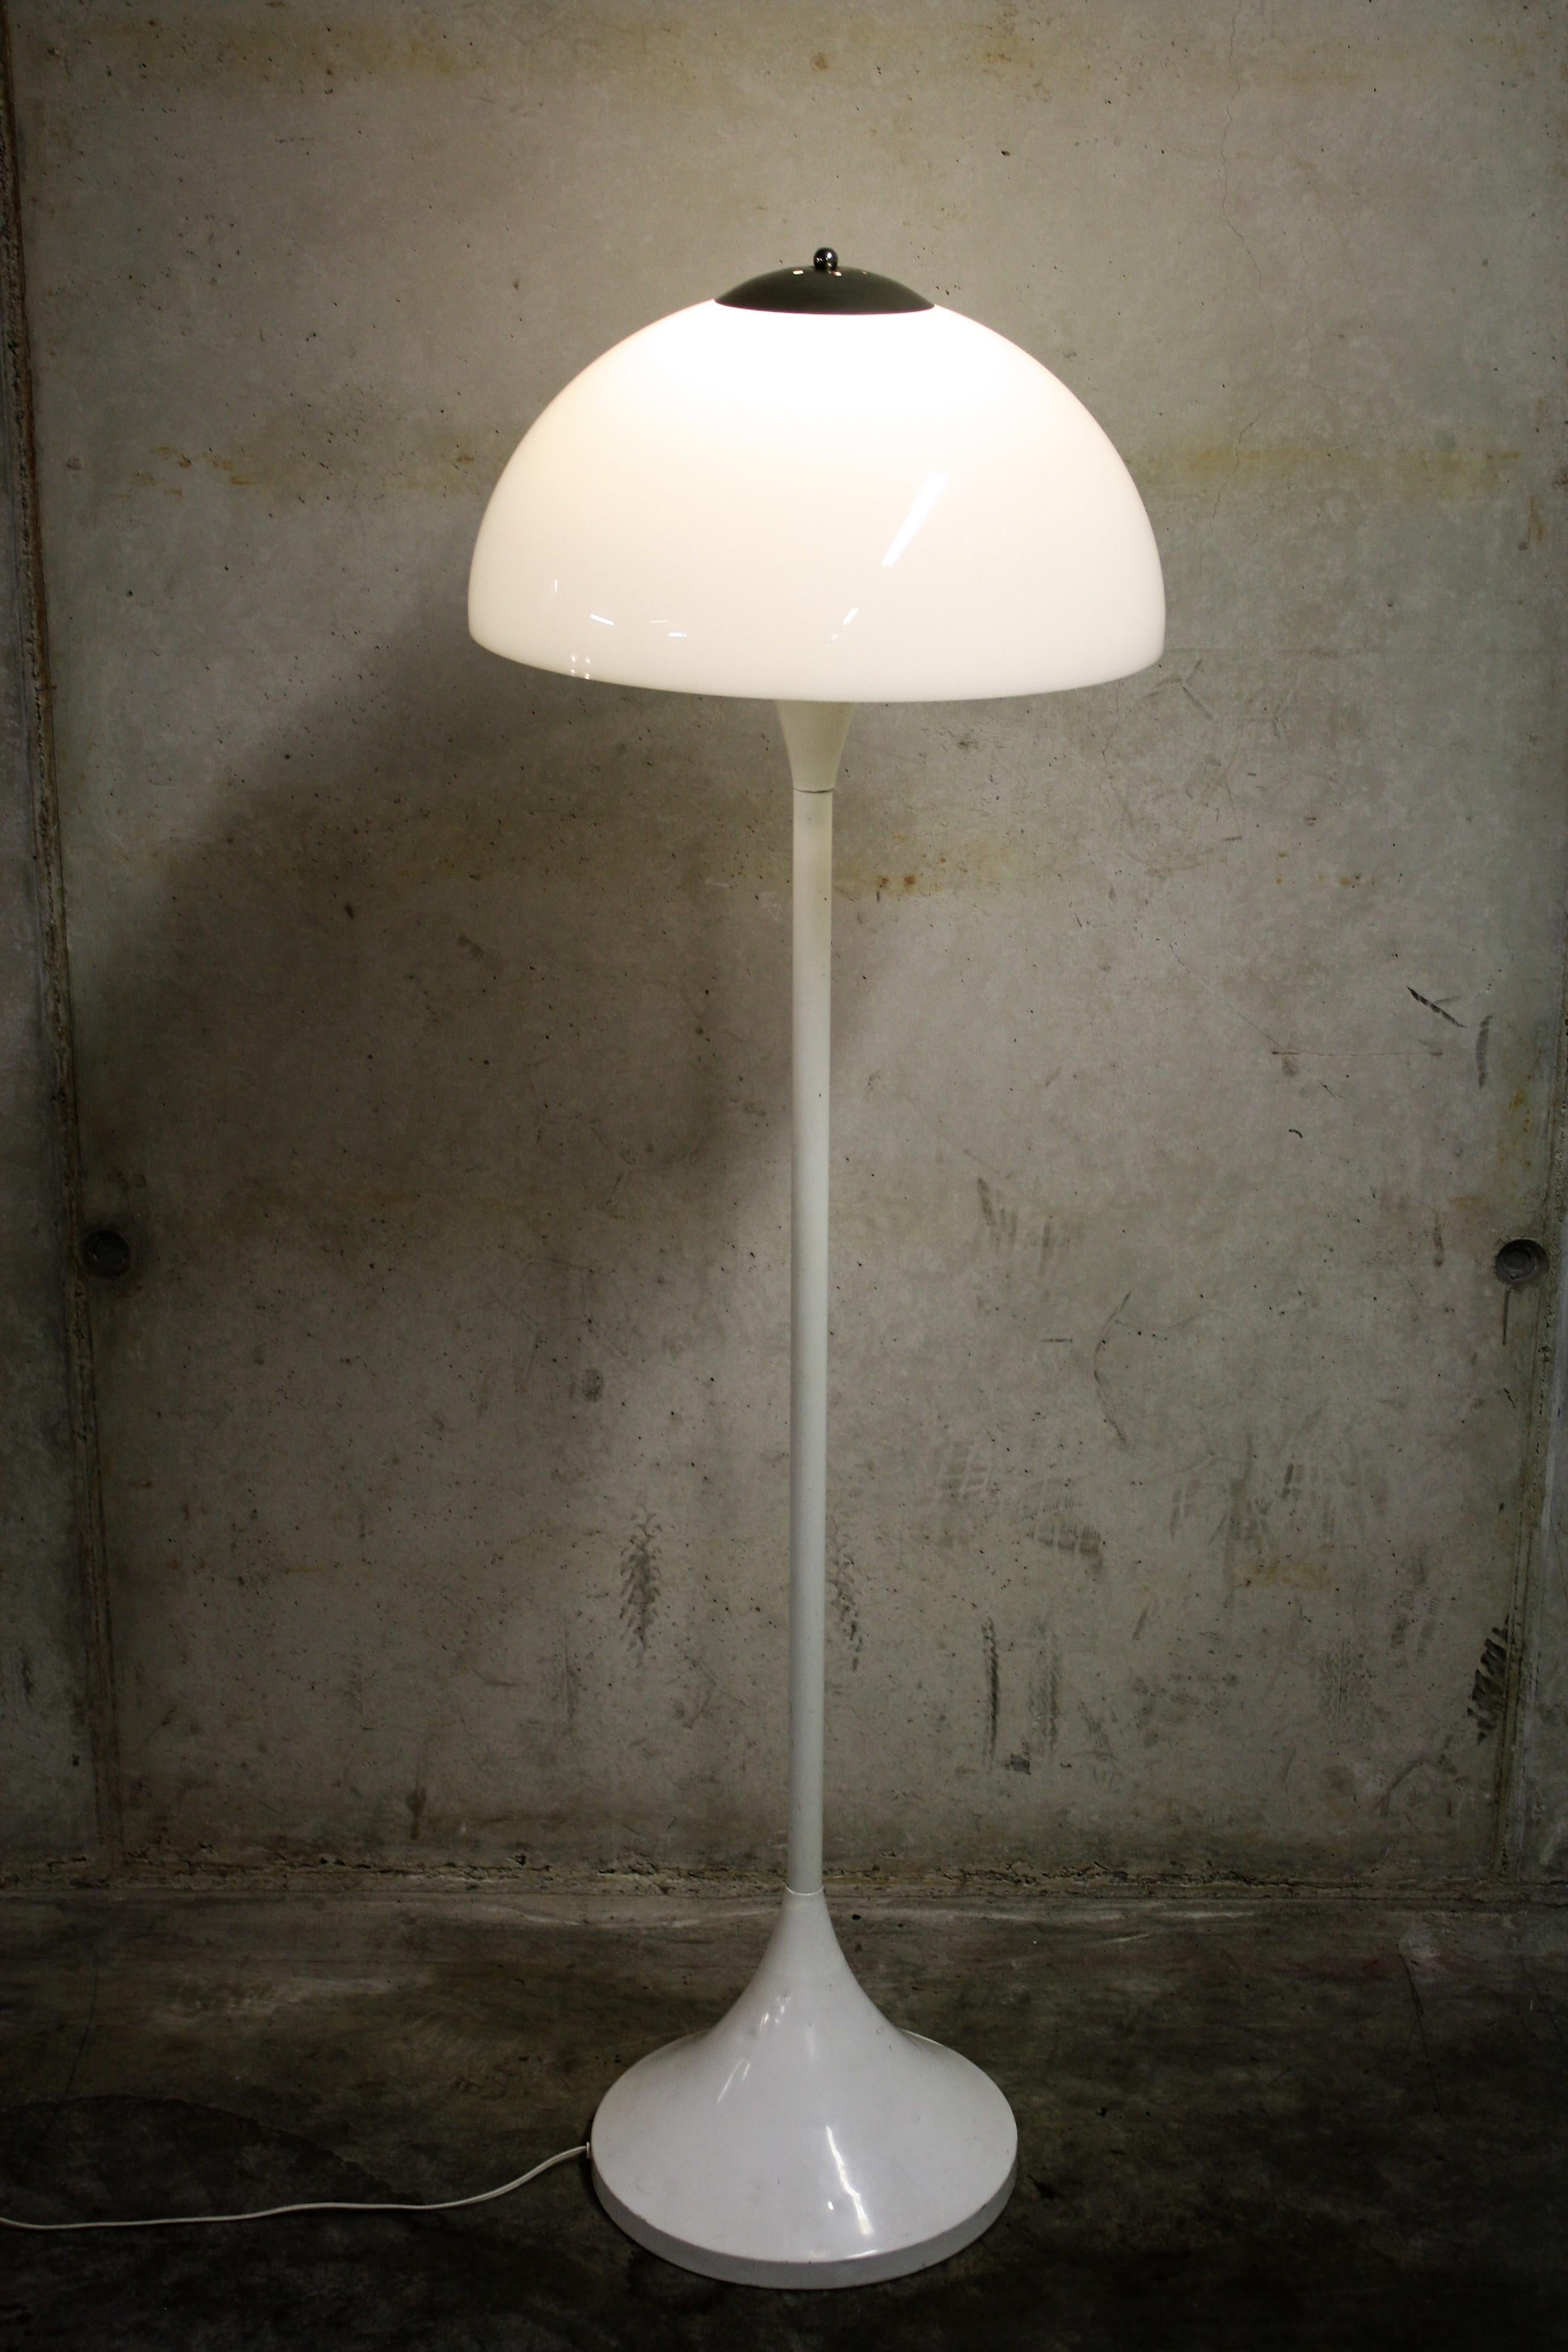 Vintage mushroom floor lamp by Hala Zeist.

As you can see in the pictures, the lamp is labeled. 

The lamp is made of plastic with a slightly transparent shade in order to transmit a lovely 'soft' light.

Tested and ready to